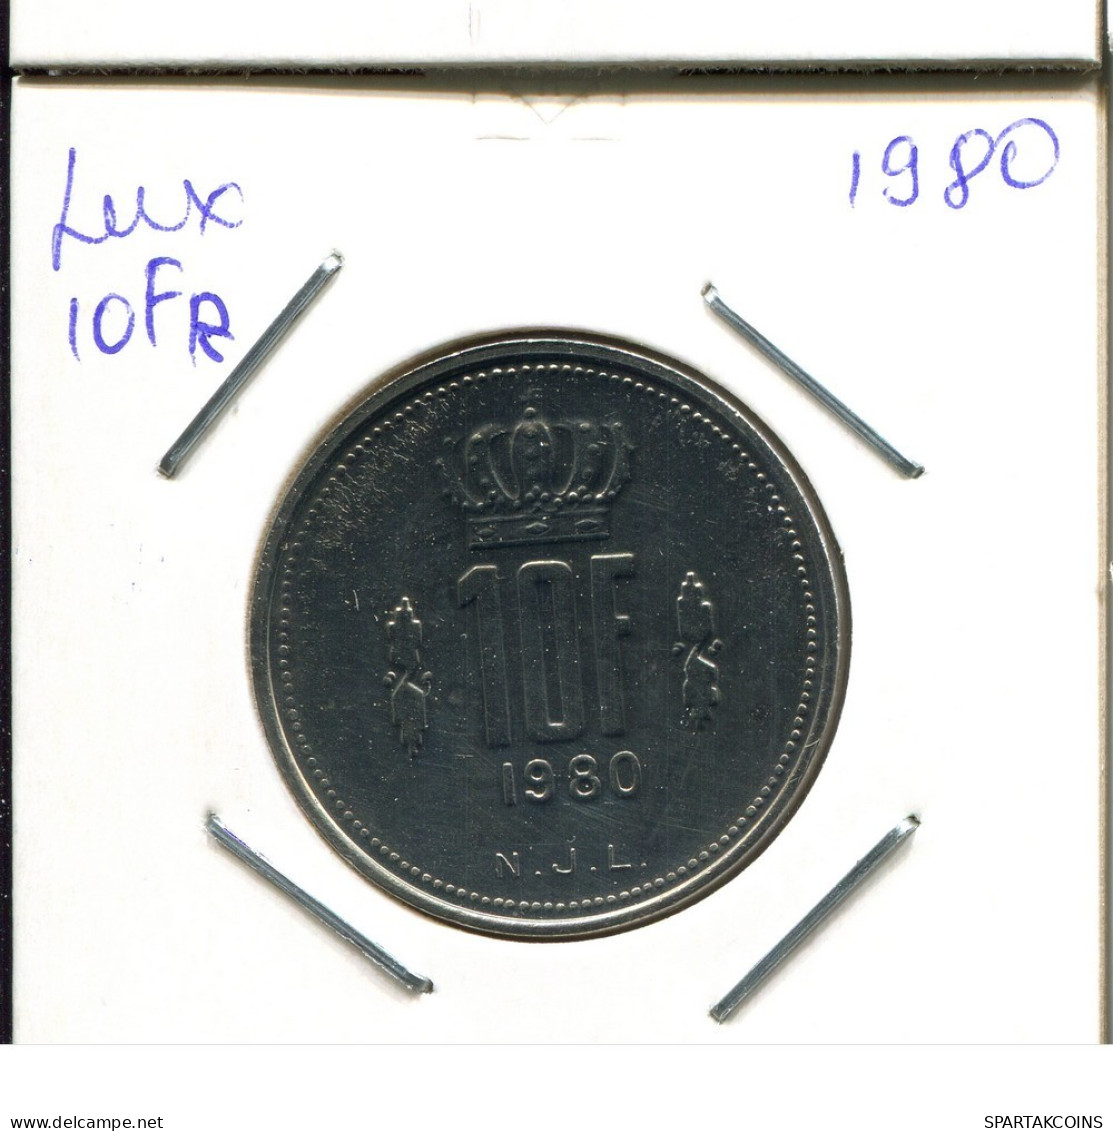 10 FRANCS 1980 LUXEMBURGO LUXEMBOURG Moneda #AT244.E.A - Luxembourg